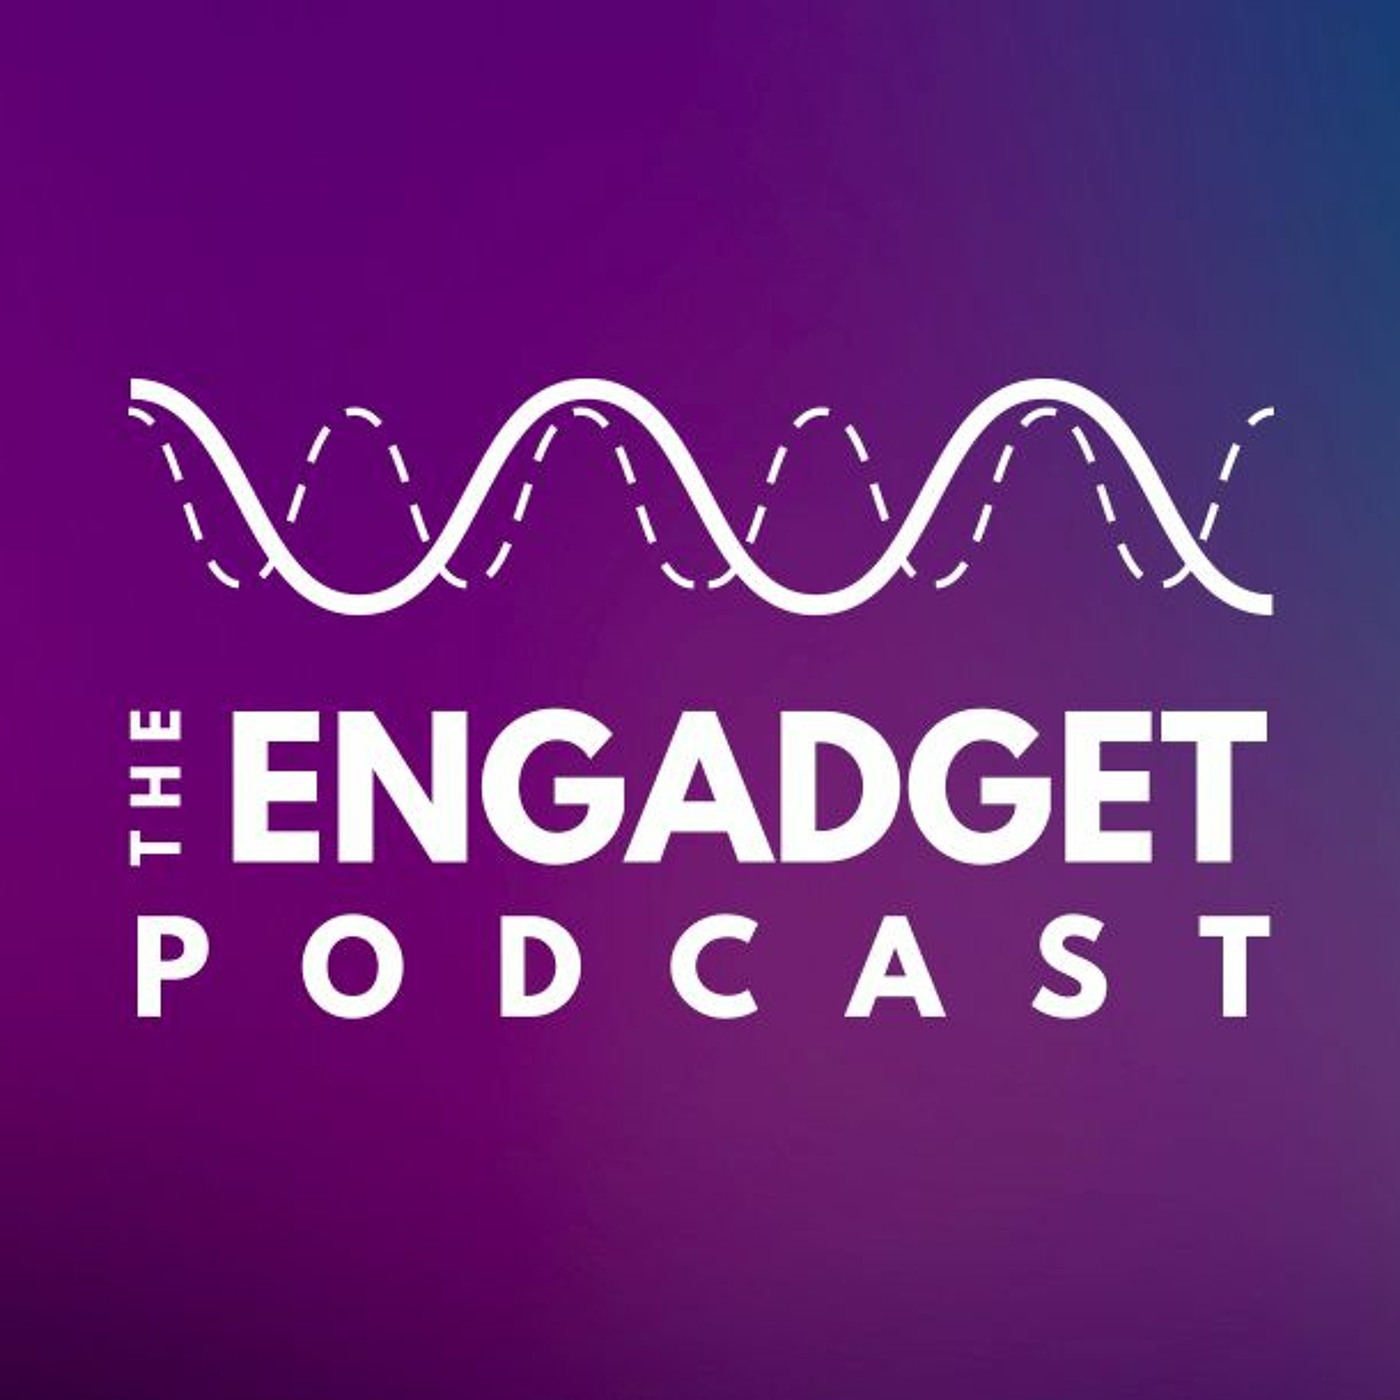 The Engadget Podcast Ep 6: I Beg Your Pardon (I Never Promised You A Rose Garden)